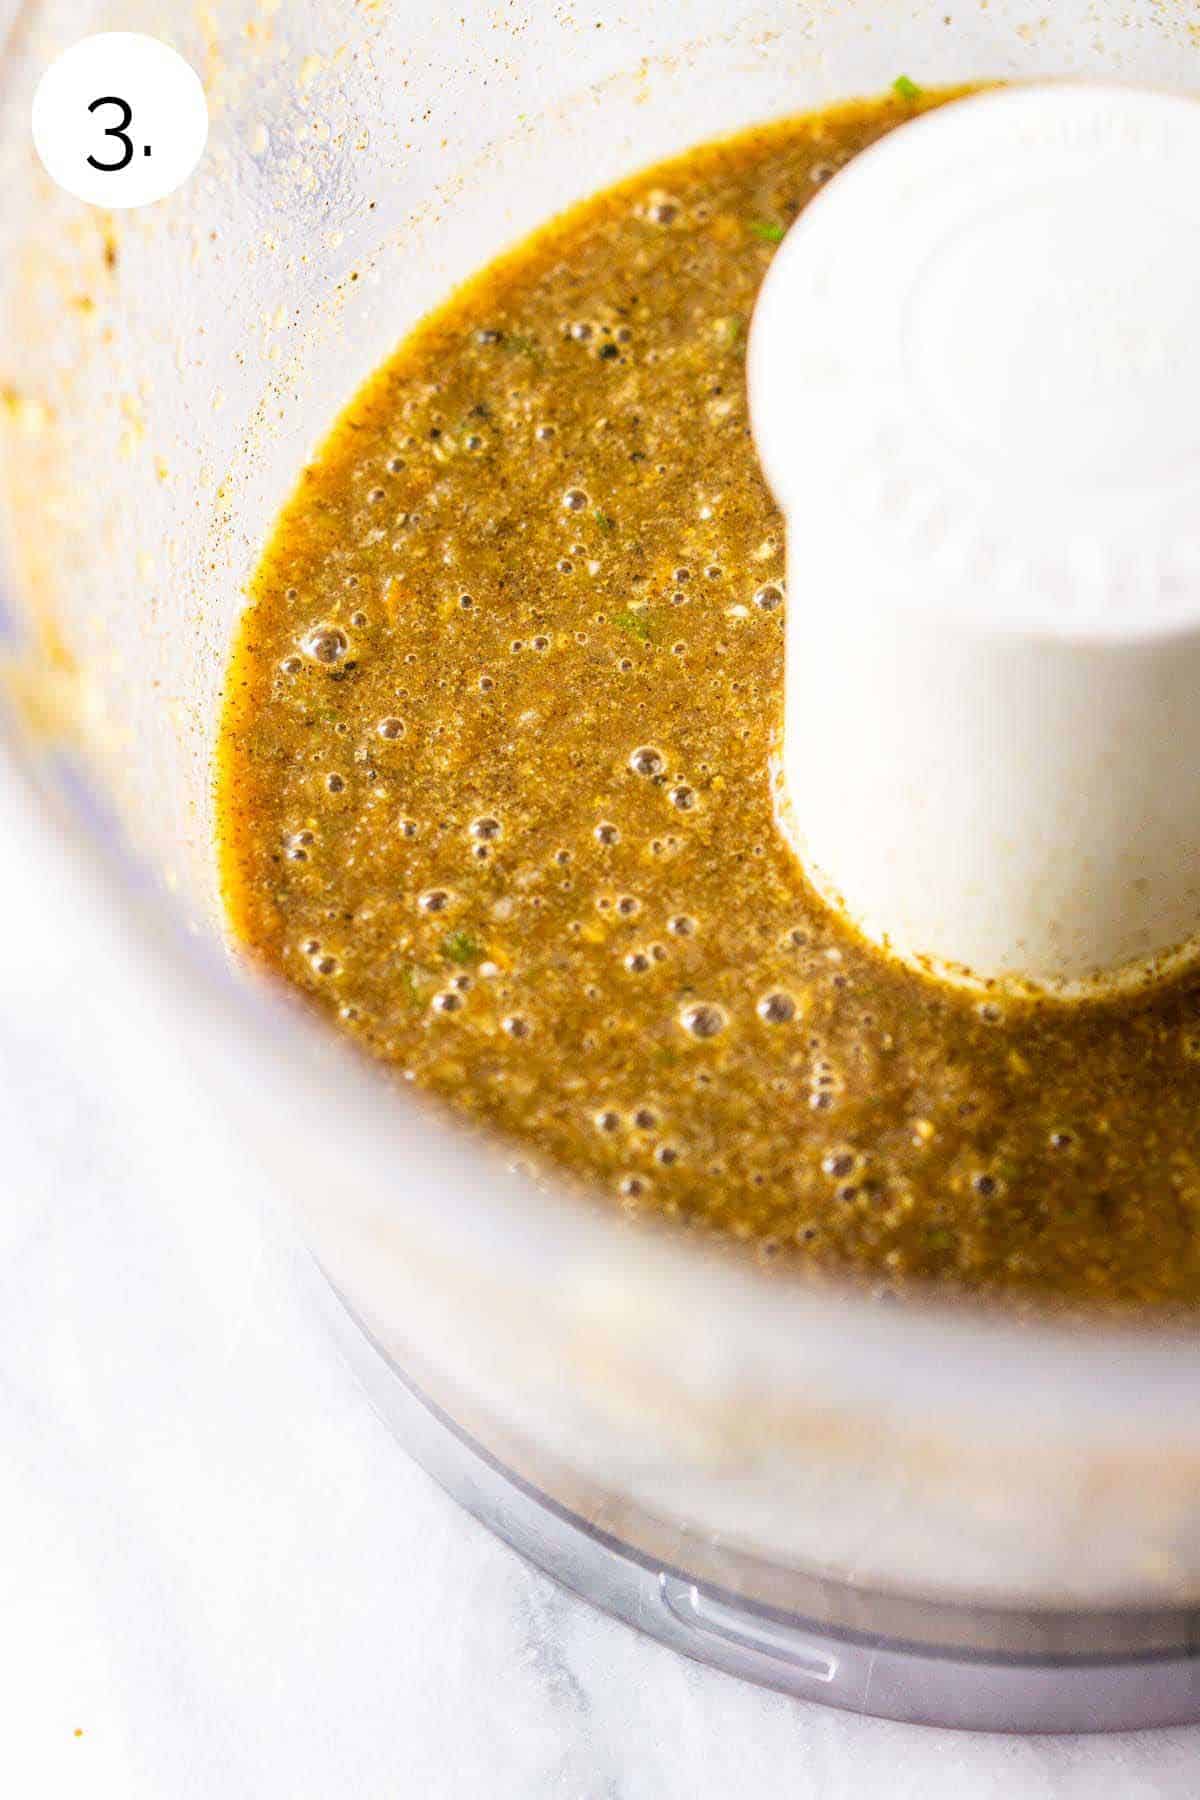 The jerk marinade in a food processor after it's been blended with the liquid ingredients.